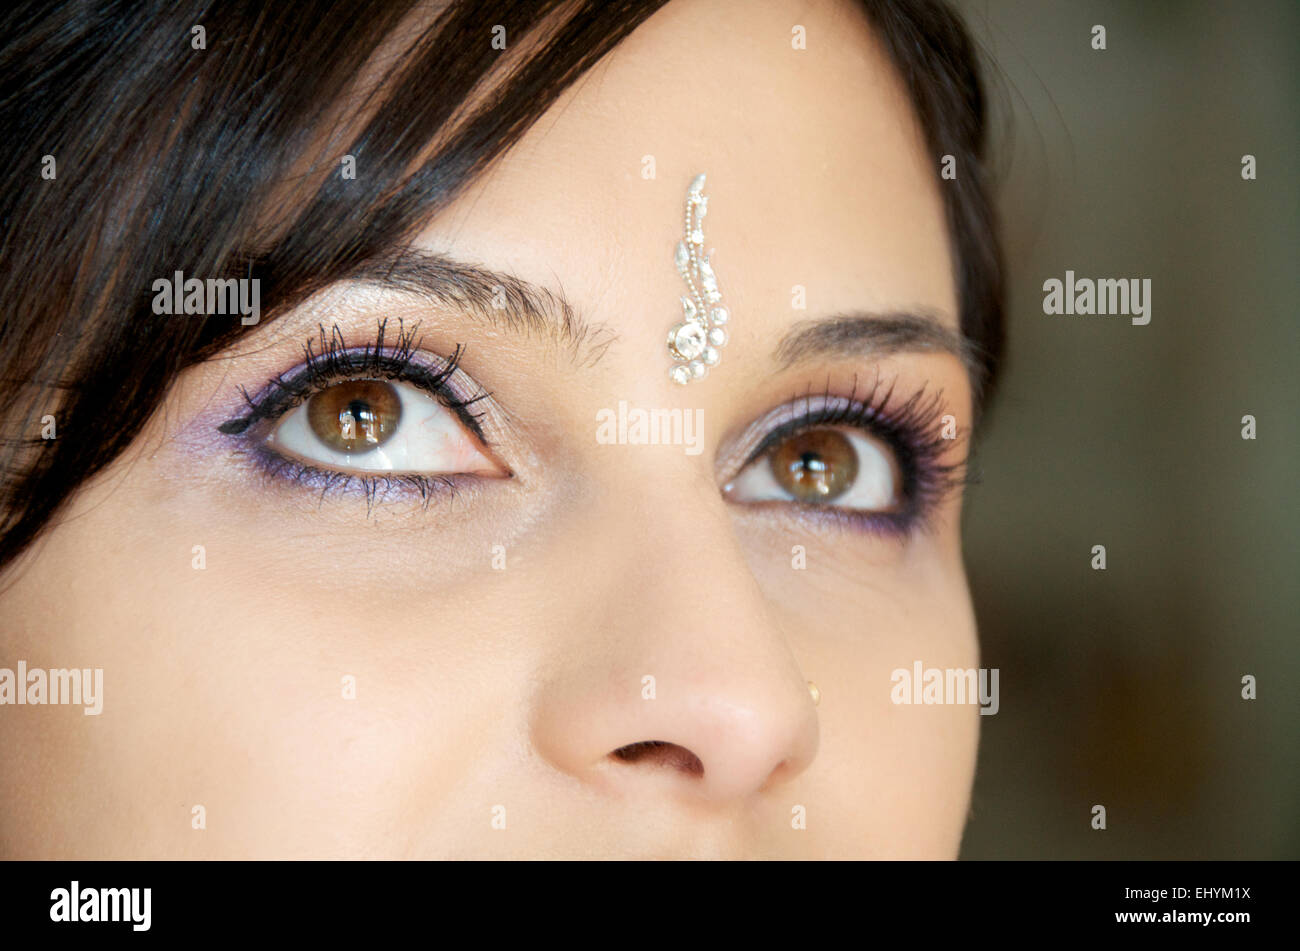 Close up of mid adult woman's eyes and bindi on her forehead Stock Photo